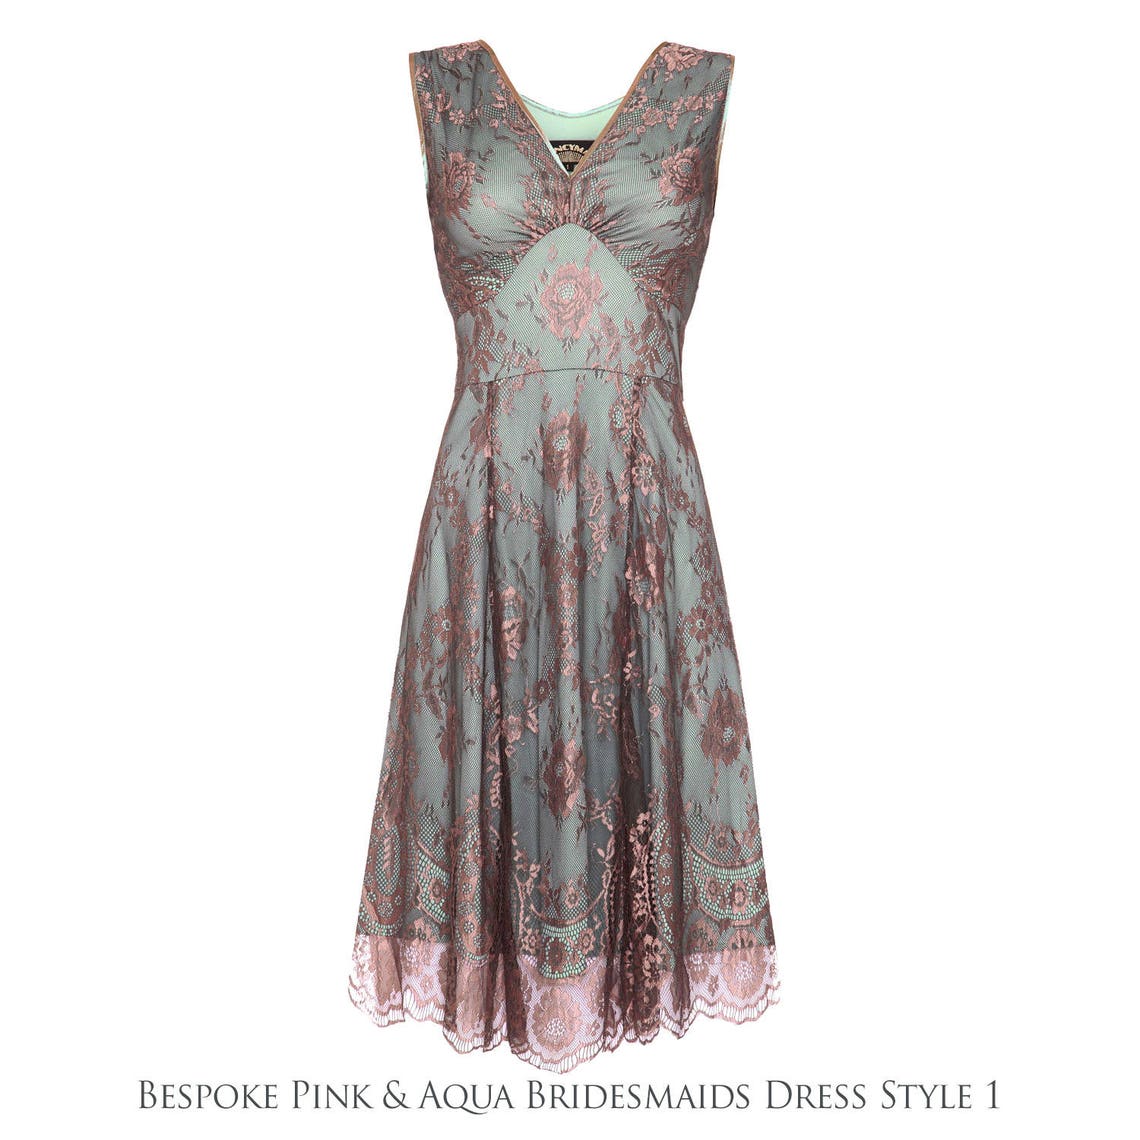 Bespoke Vintage Style Bridesmaid Dresses in Pink and Aqua Lace - Etsy